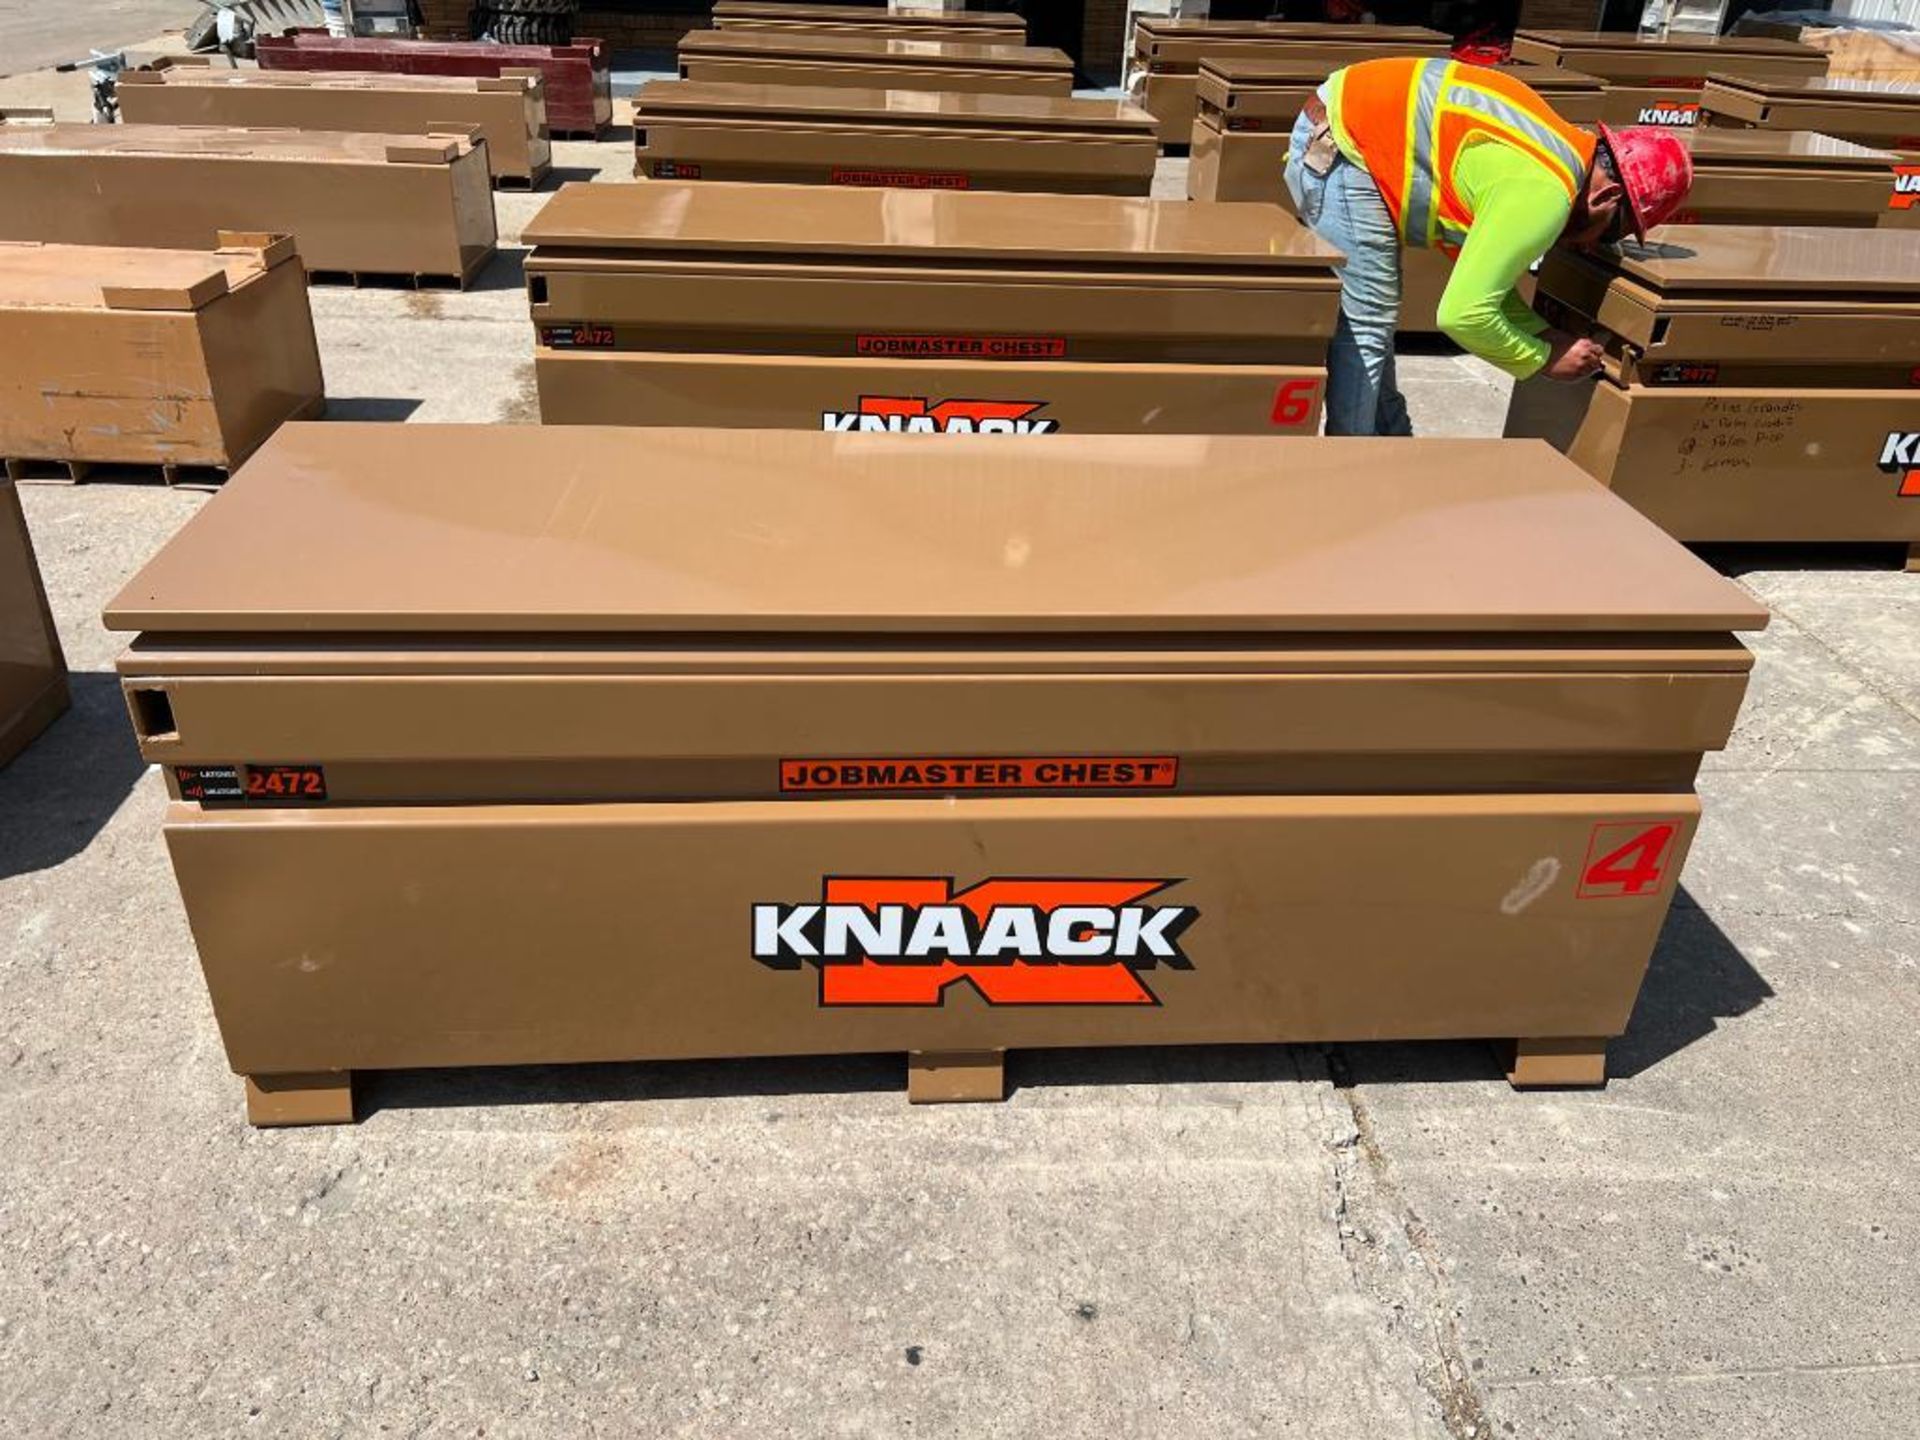 Knaack Jobmaster Chest, Model #2472, Serial #2210917031. Located in Mt. Pleasant, IA